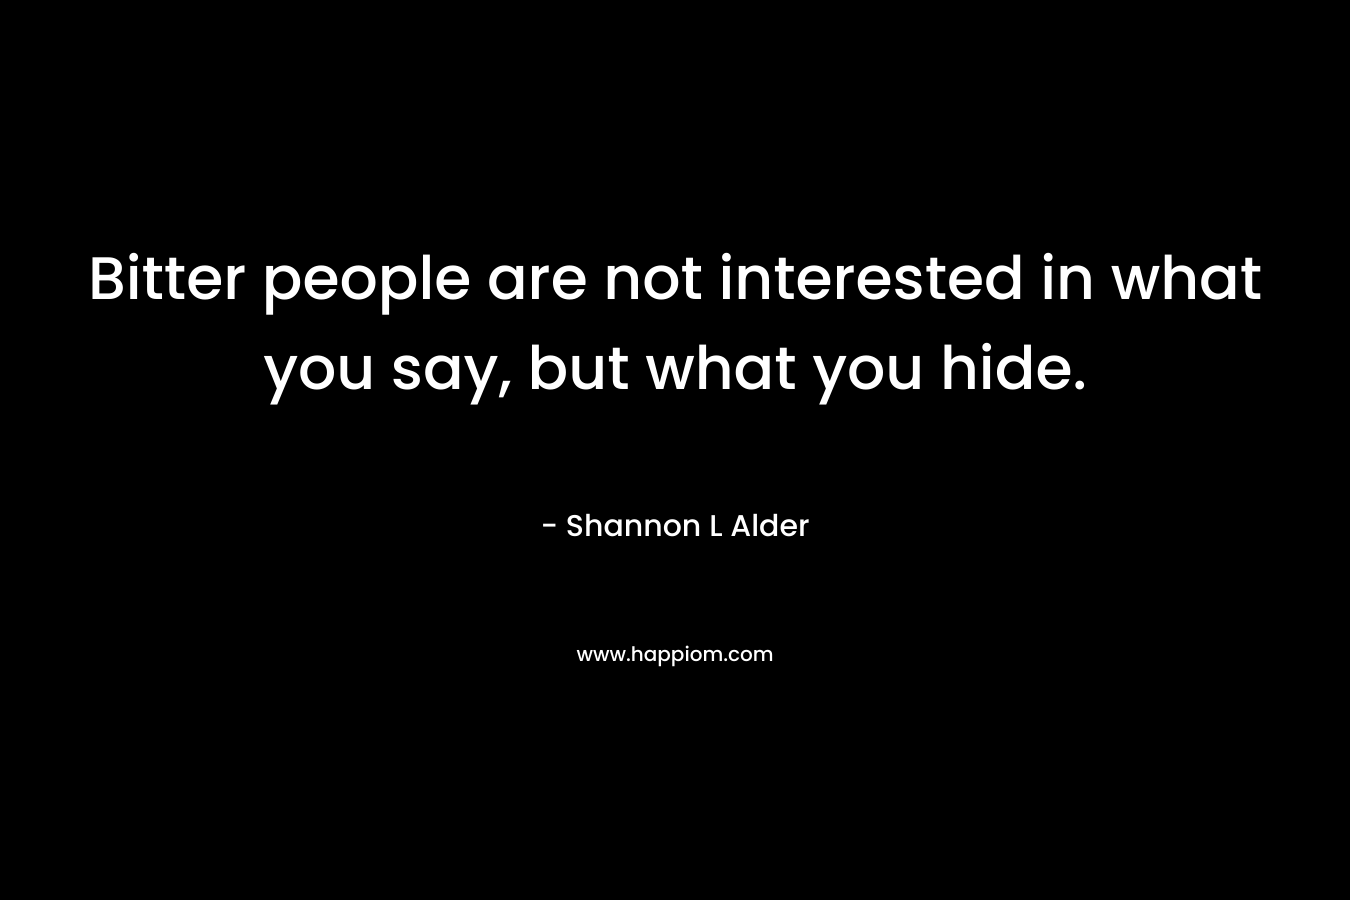 Bitter people are not interested in what you say, but what you hide.